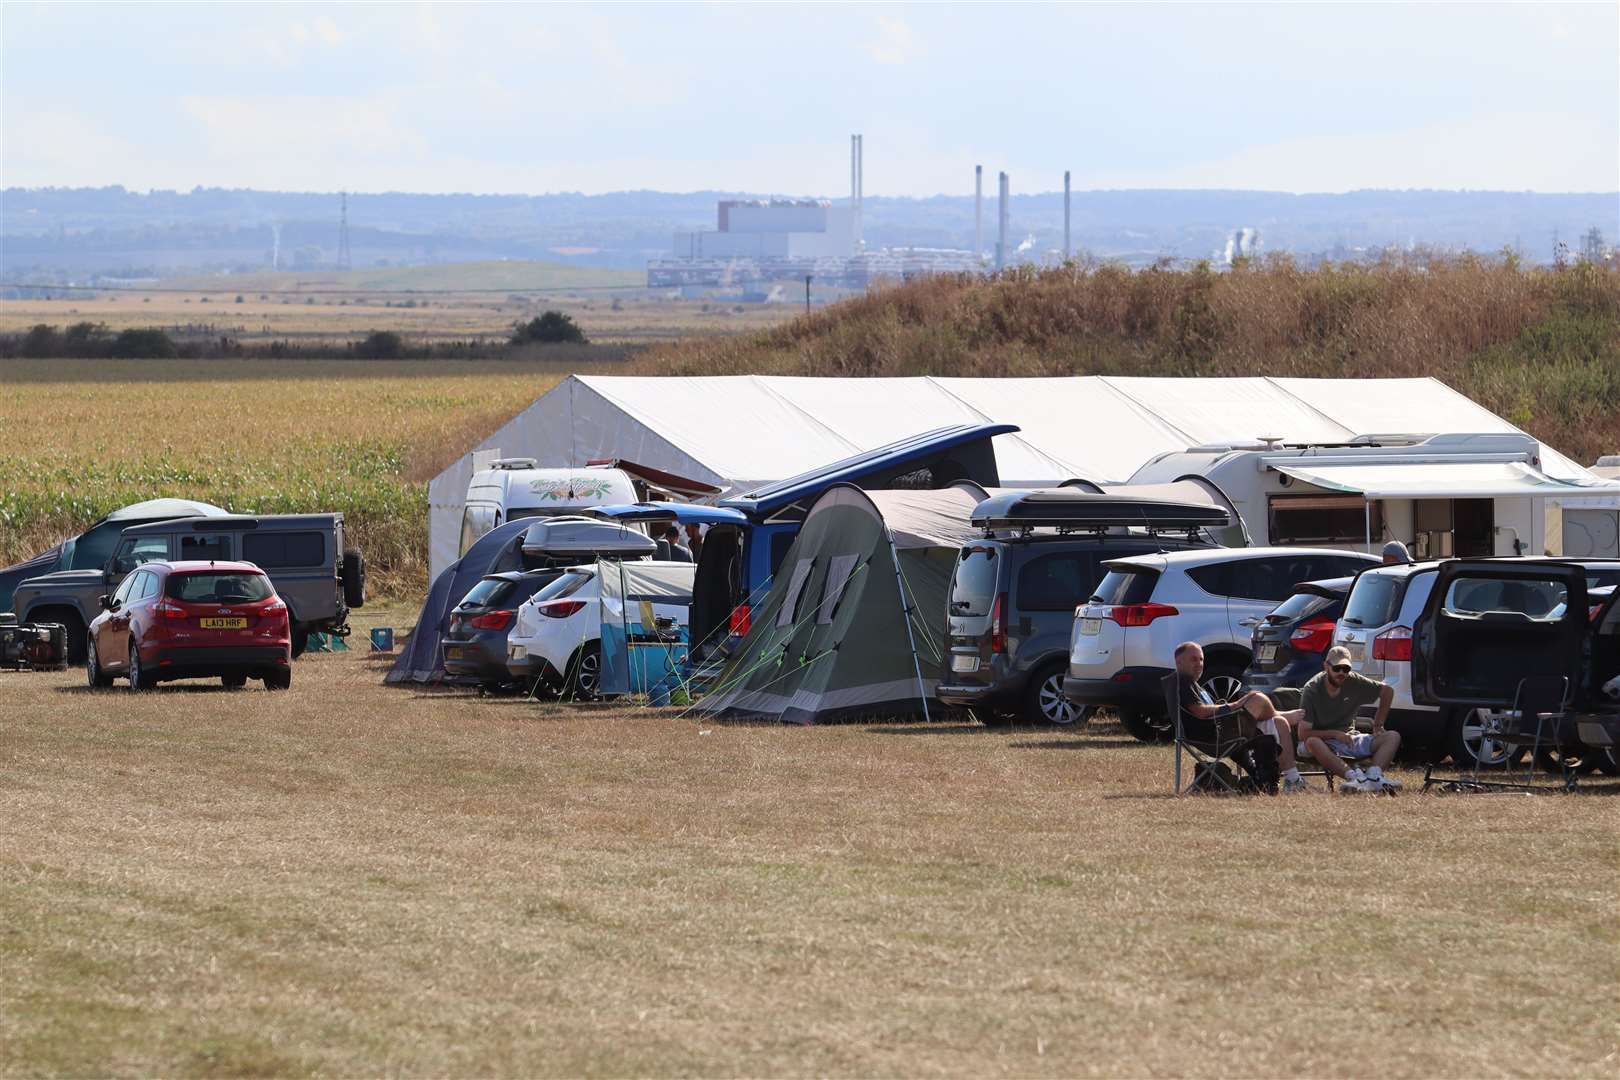 Temporary headquarters of the Medway History Finders on Sheppey